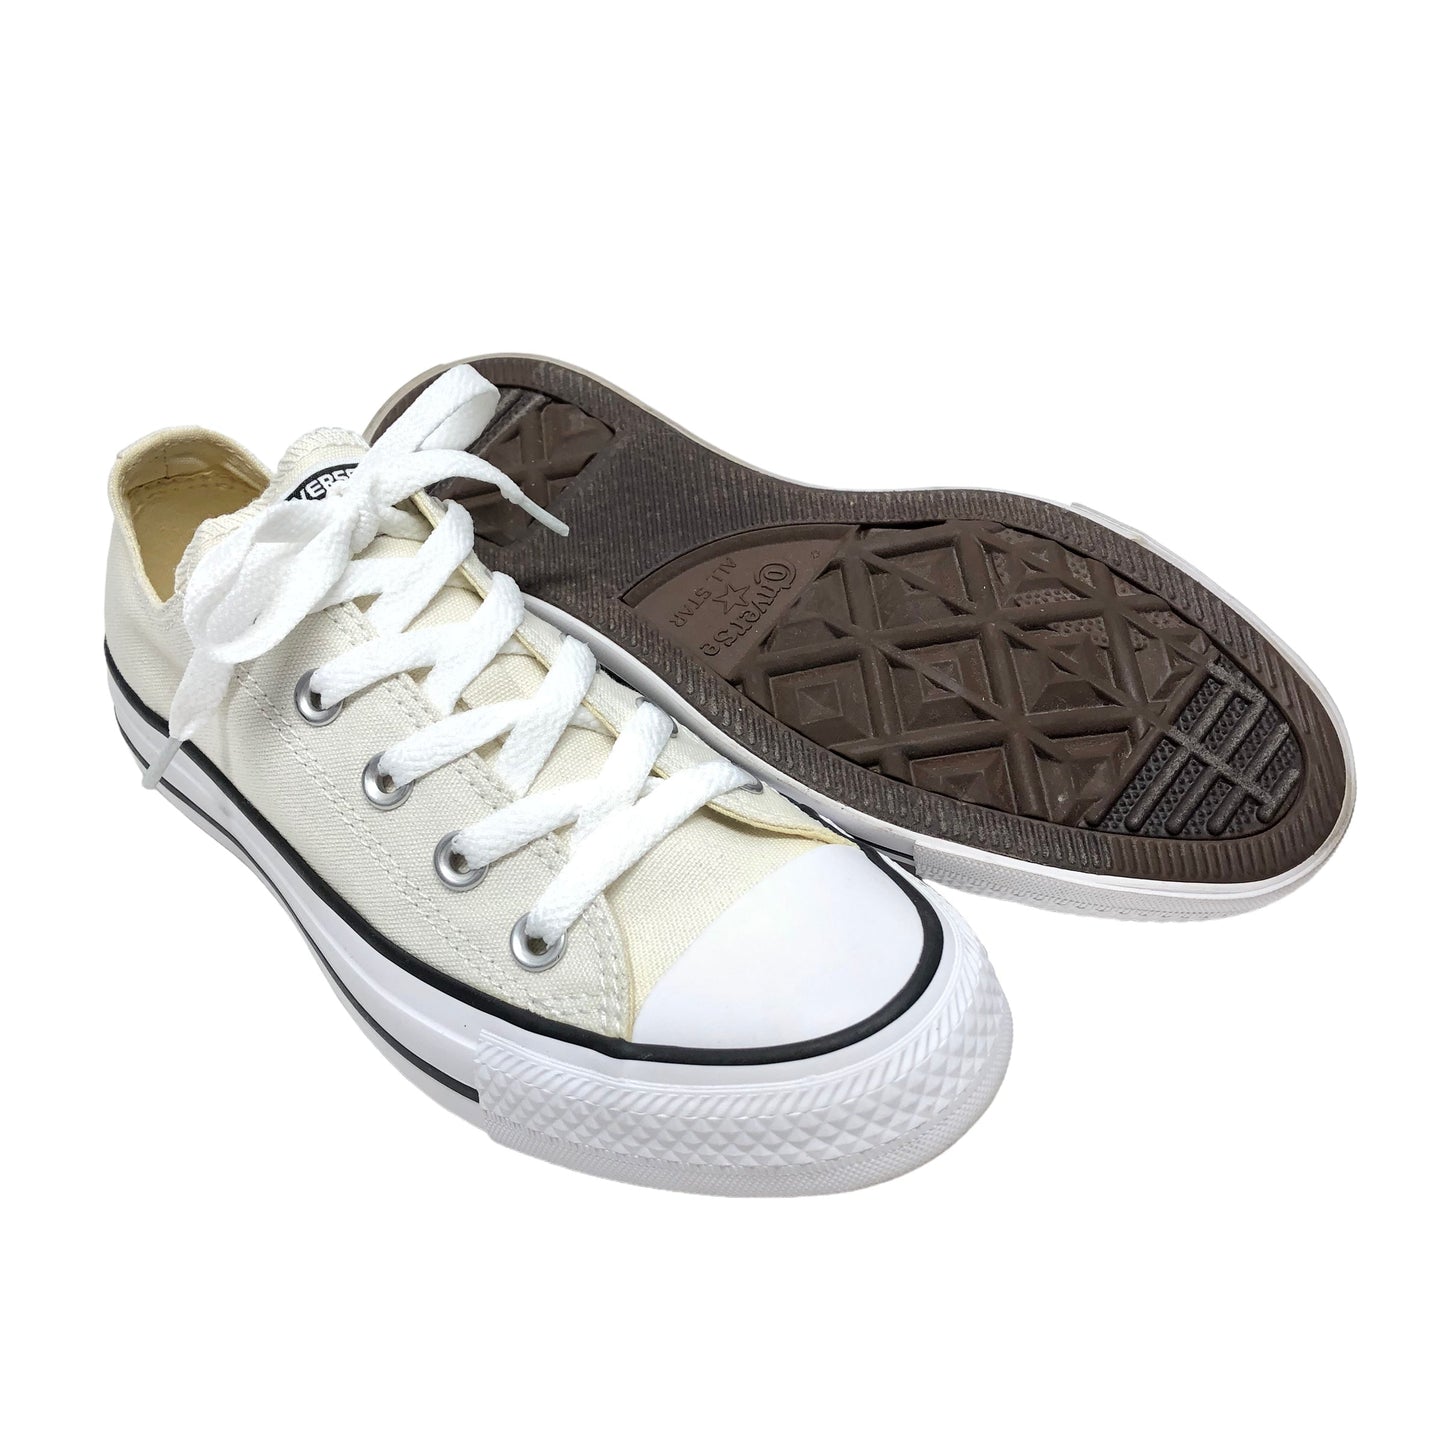 White Shoes Sneakers Converse, Size 6